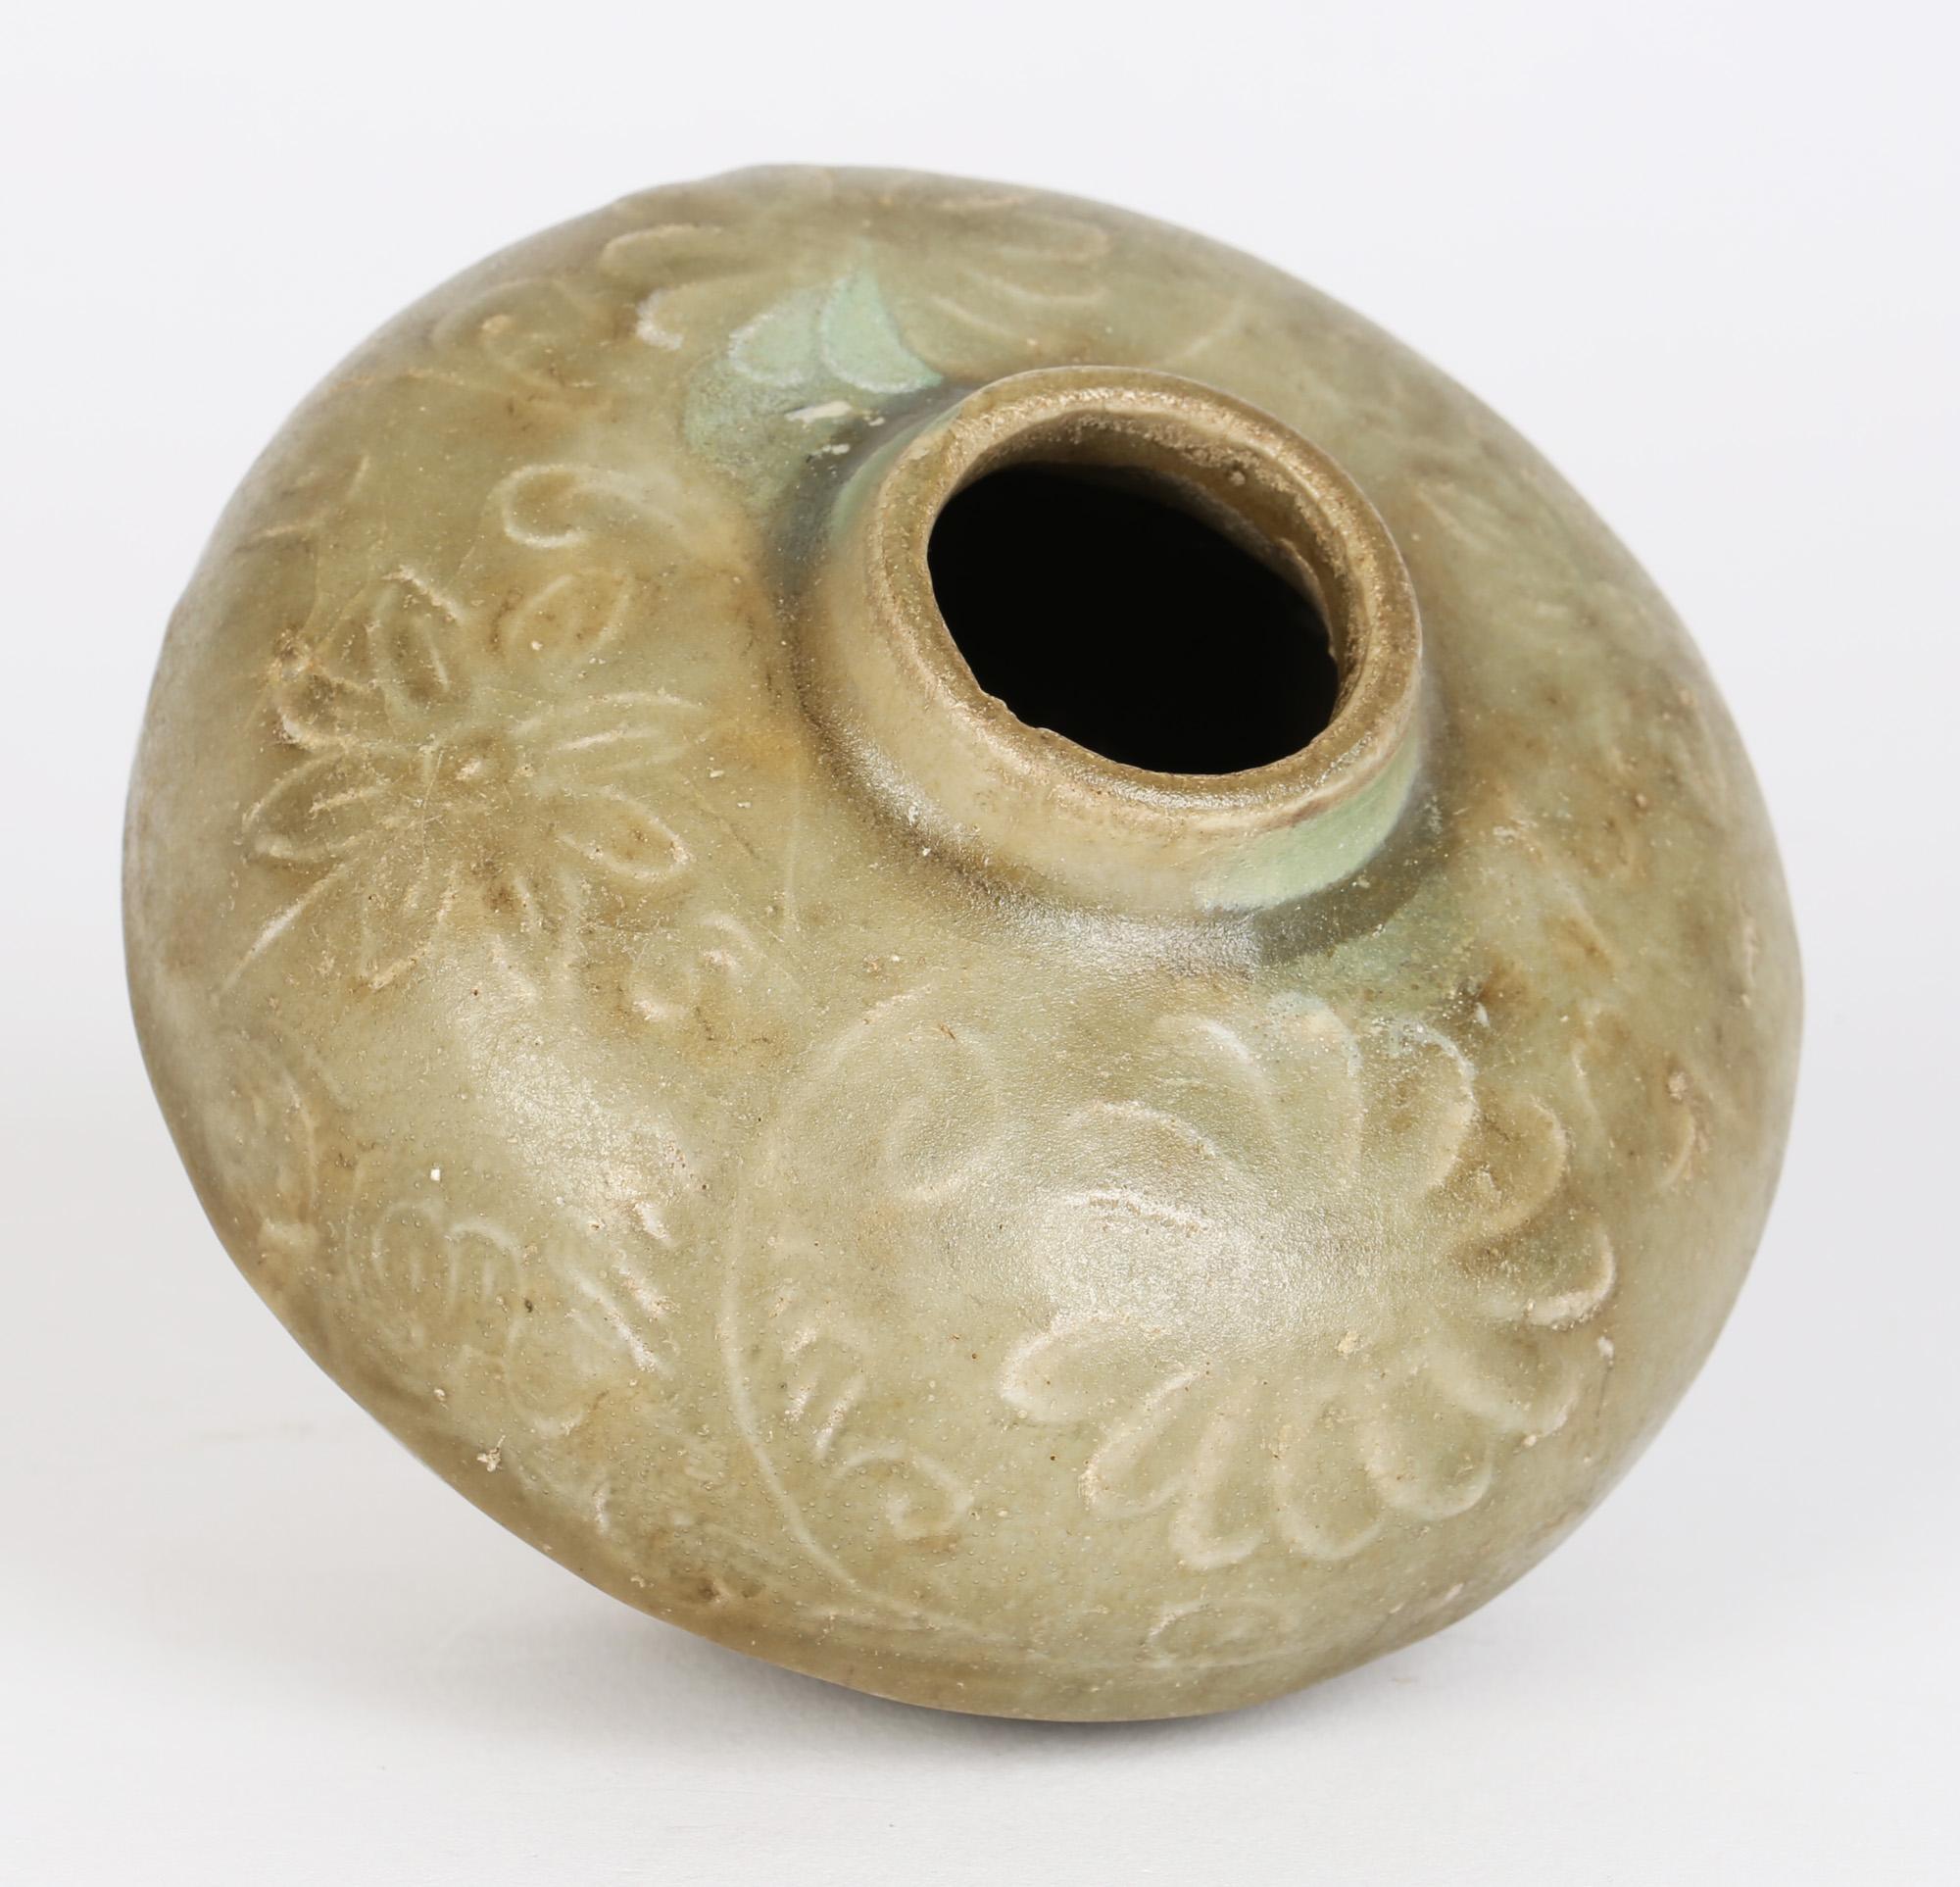 A good antique Chinese Song/Yuan Dynasty floral molded Longquan celadon glazed jar dating between 1127 and 1368. The jar of squat rounded shape stands on a narrow rounded unglazed foot with a narrow short funnel raised opening. The body is